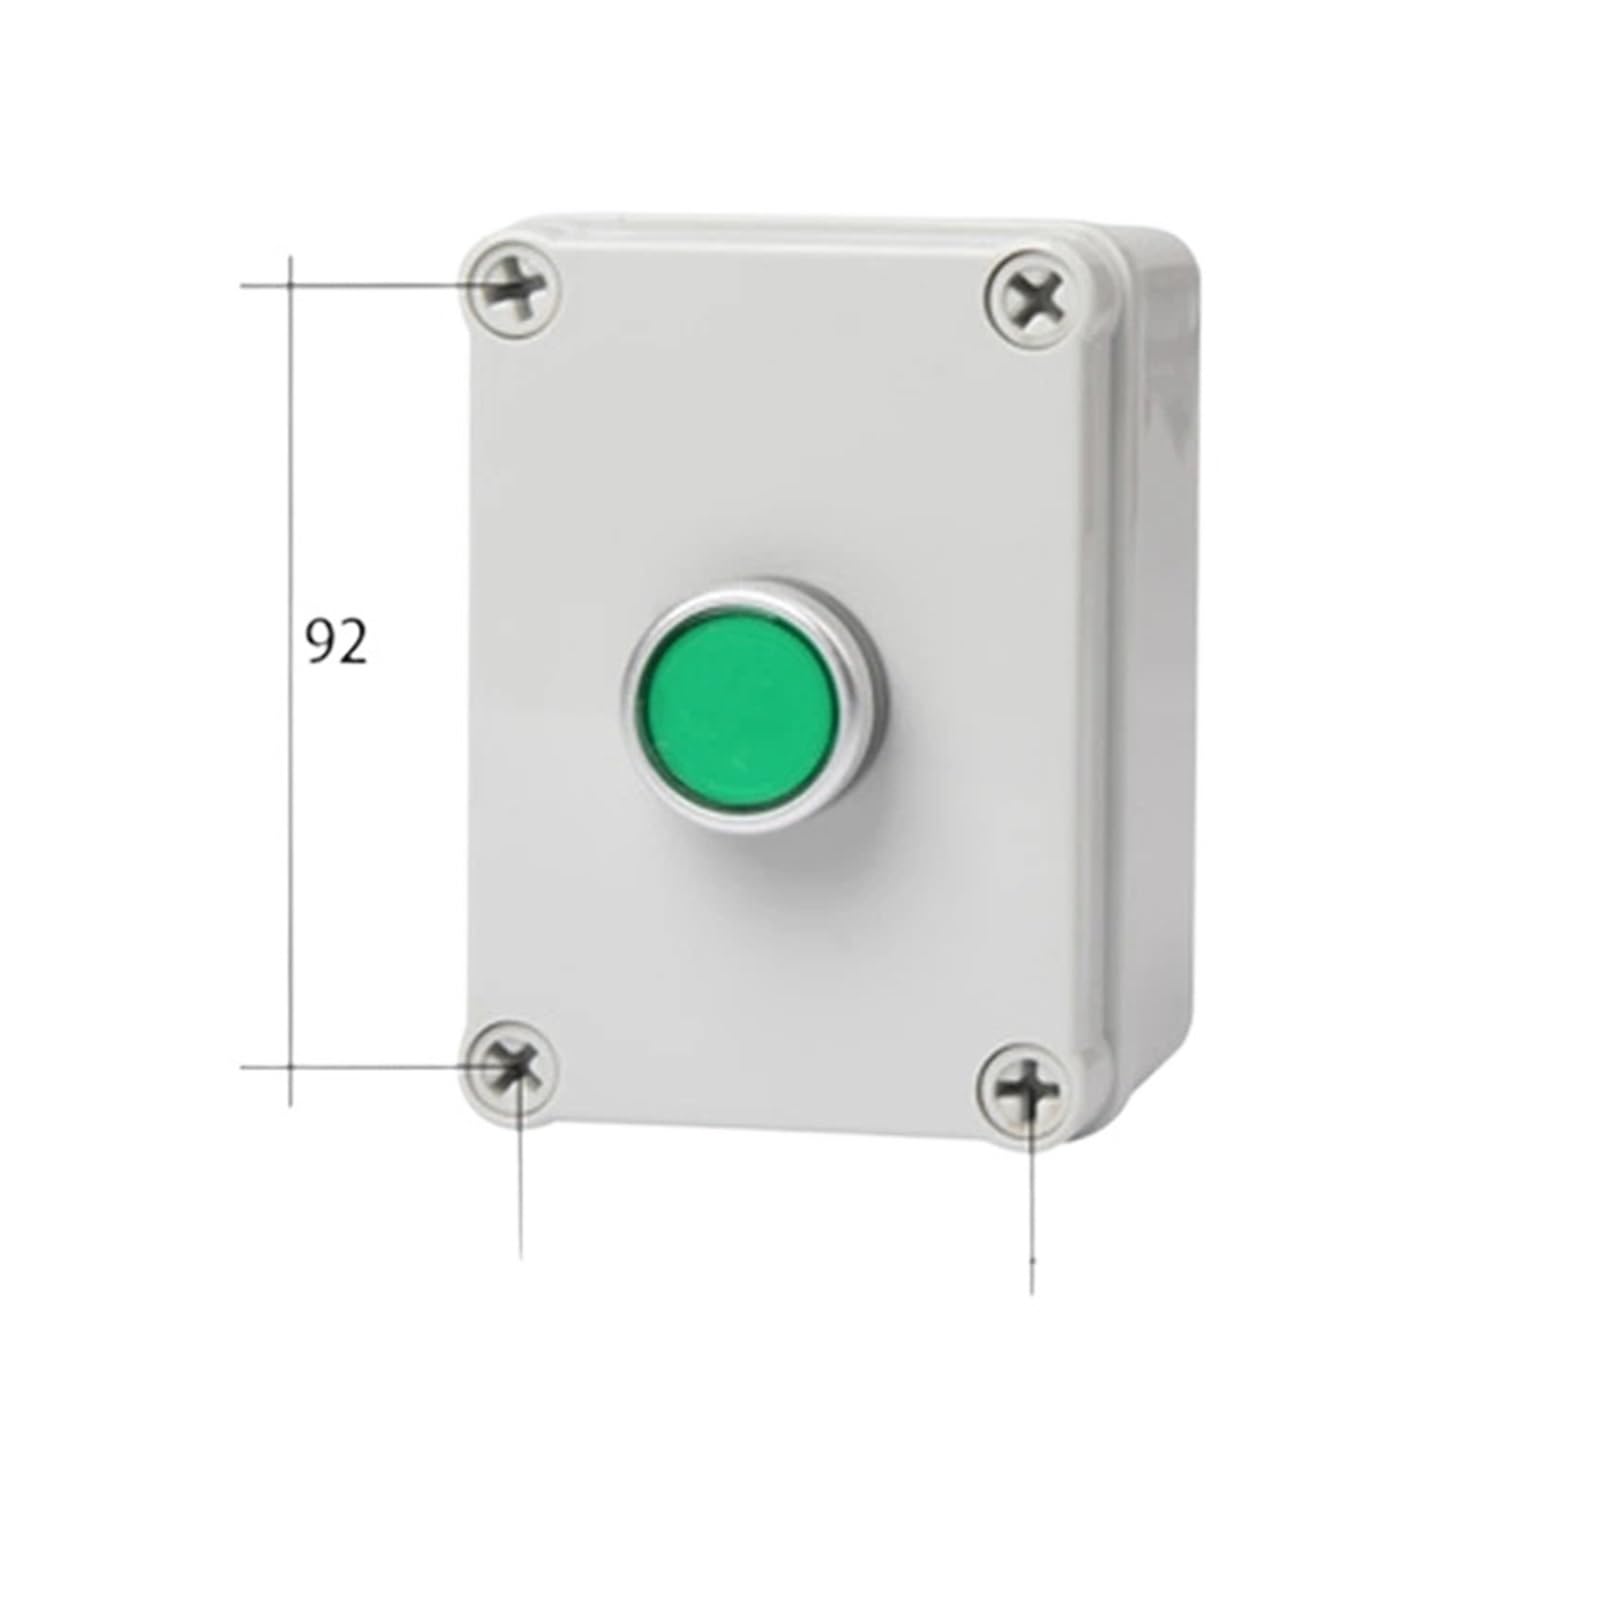 1P Button Control Box With Protective Cover Start Stop Emergency Stop Self Reset Knob Proof Box IFWGFVTZ(1P Flat Button Box) von IFWGFVTZ